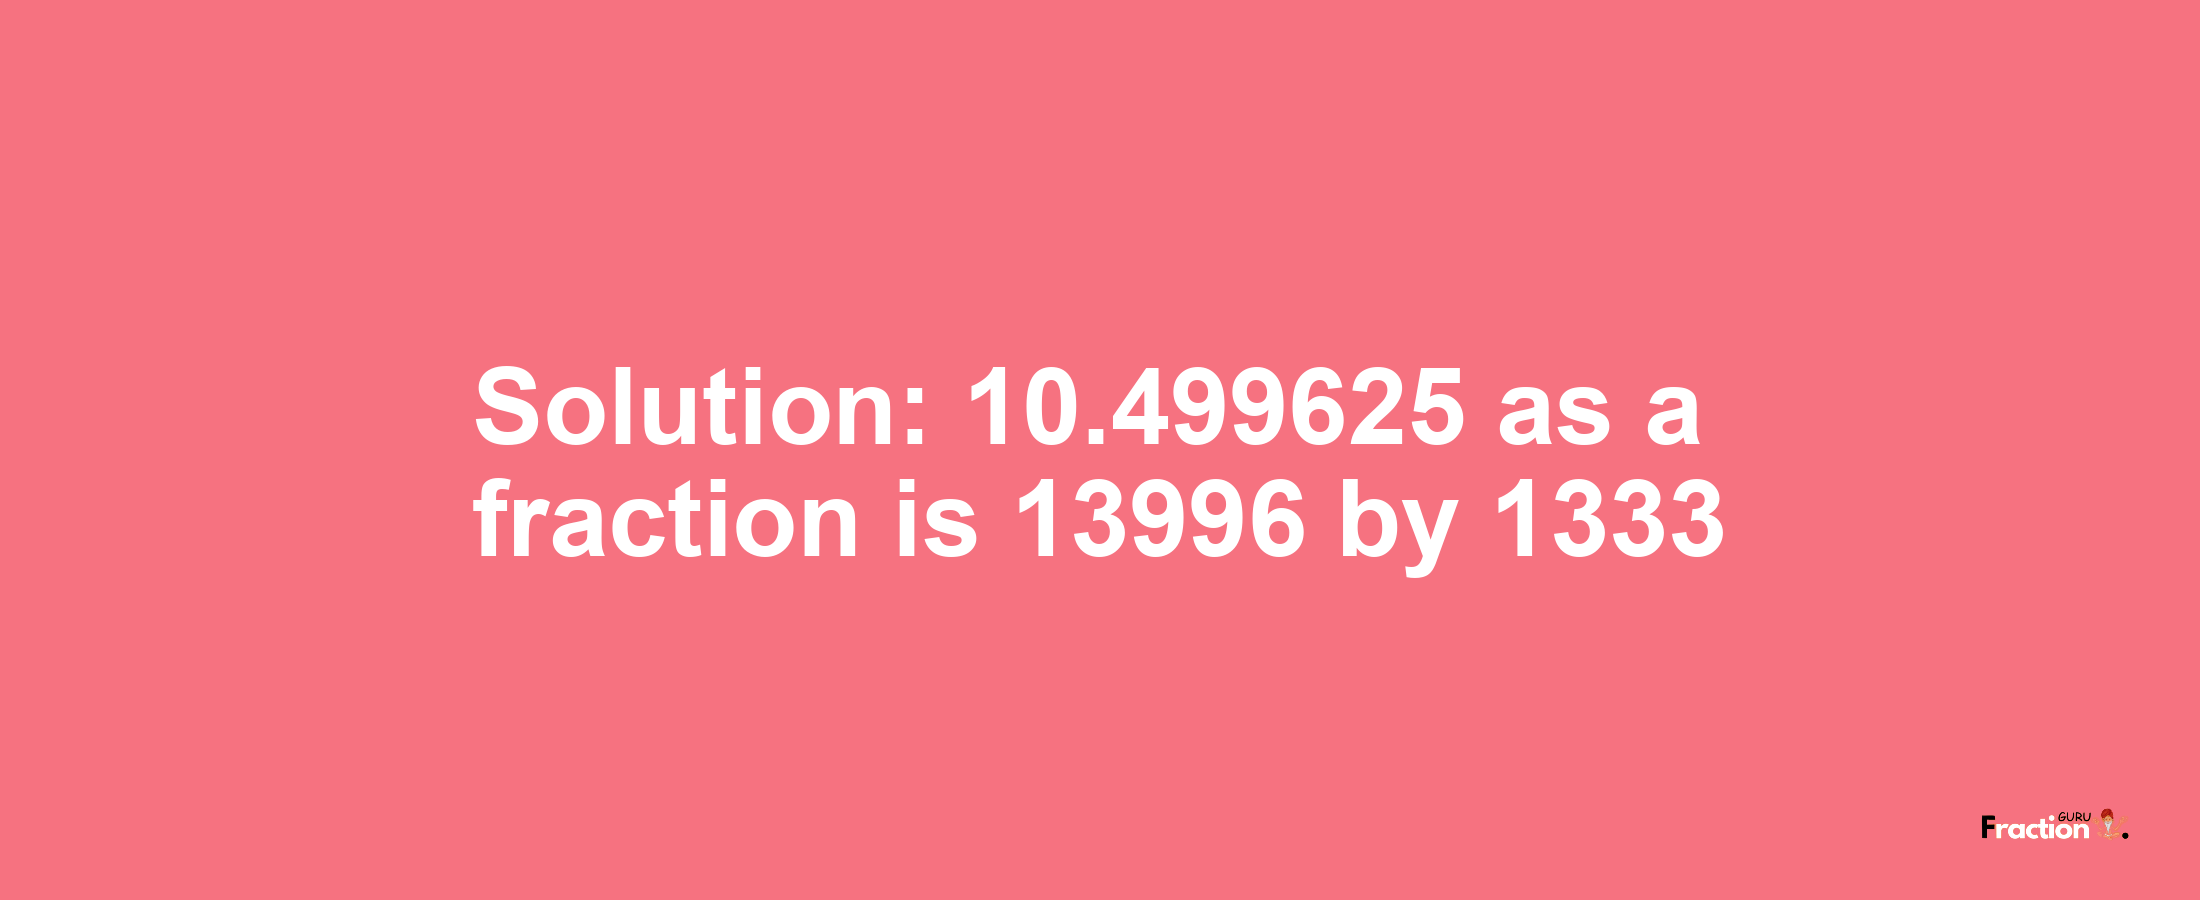 Solution:10.499625 as a fraction is 13996/1333